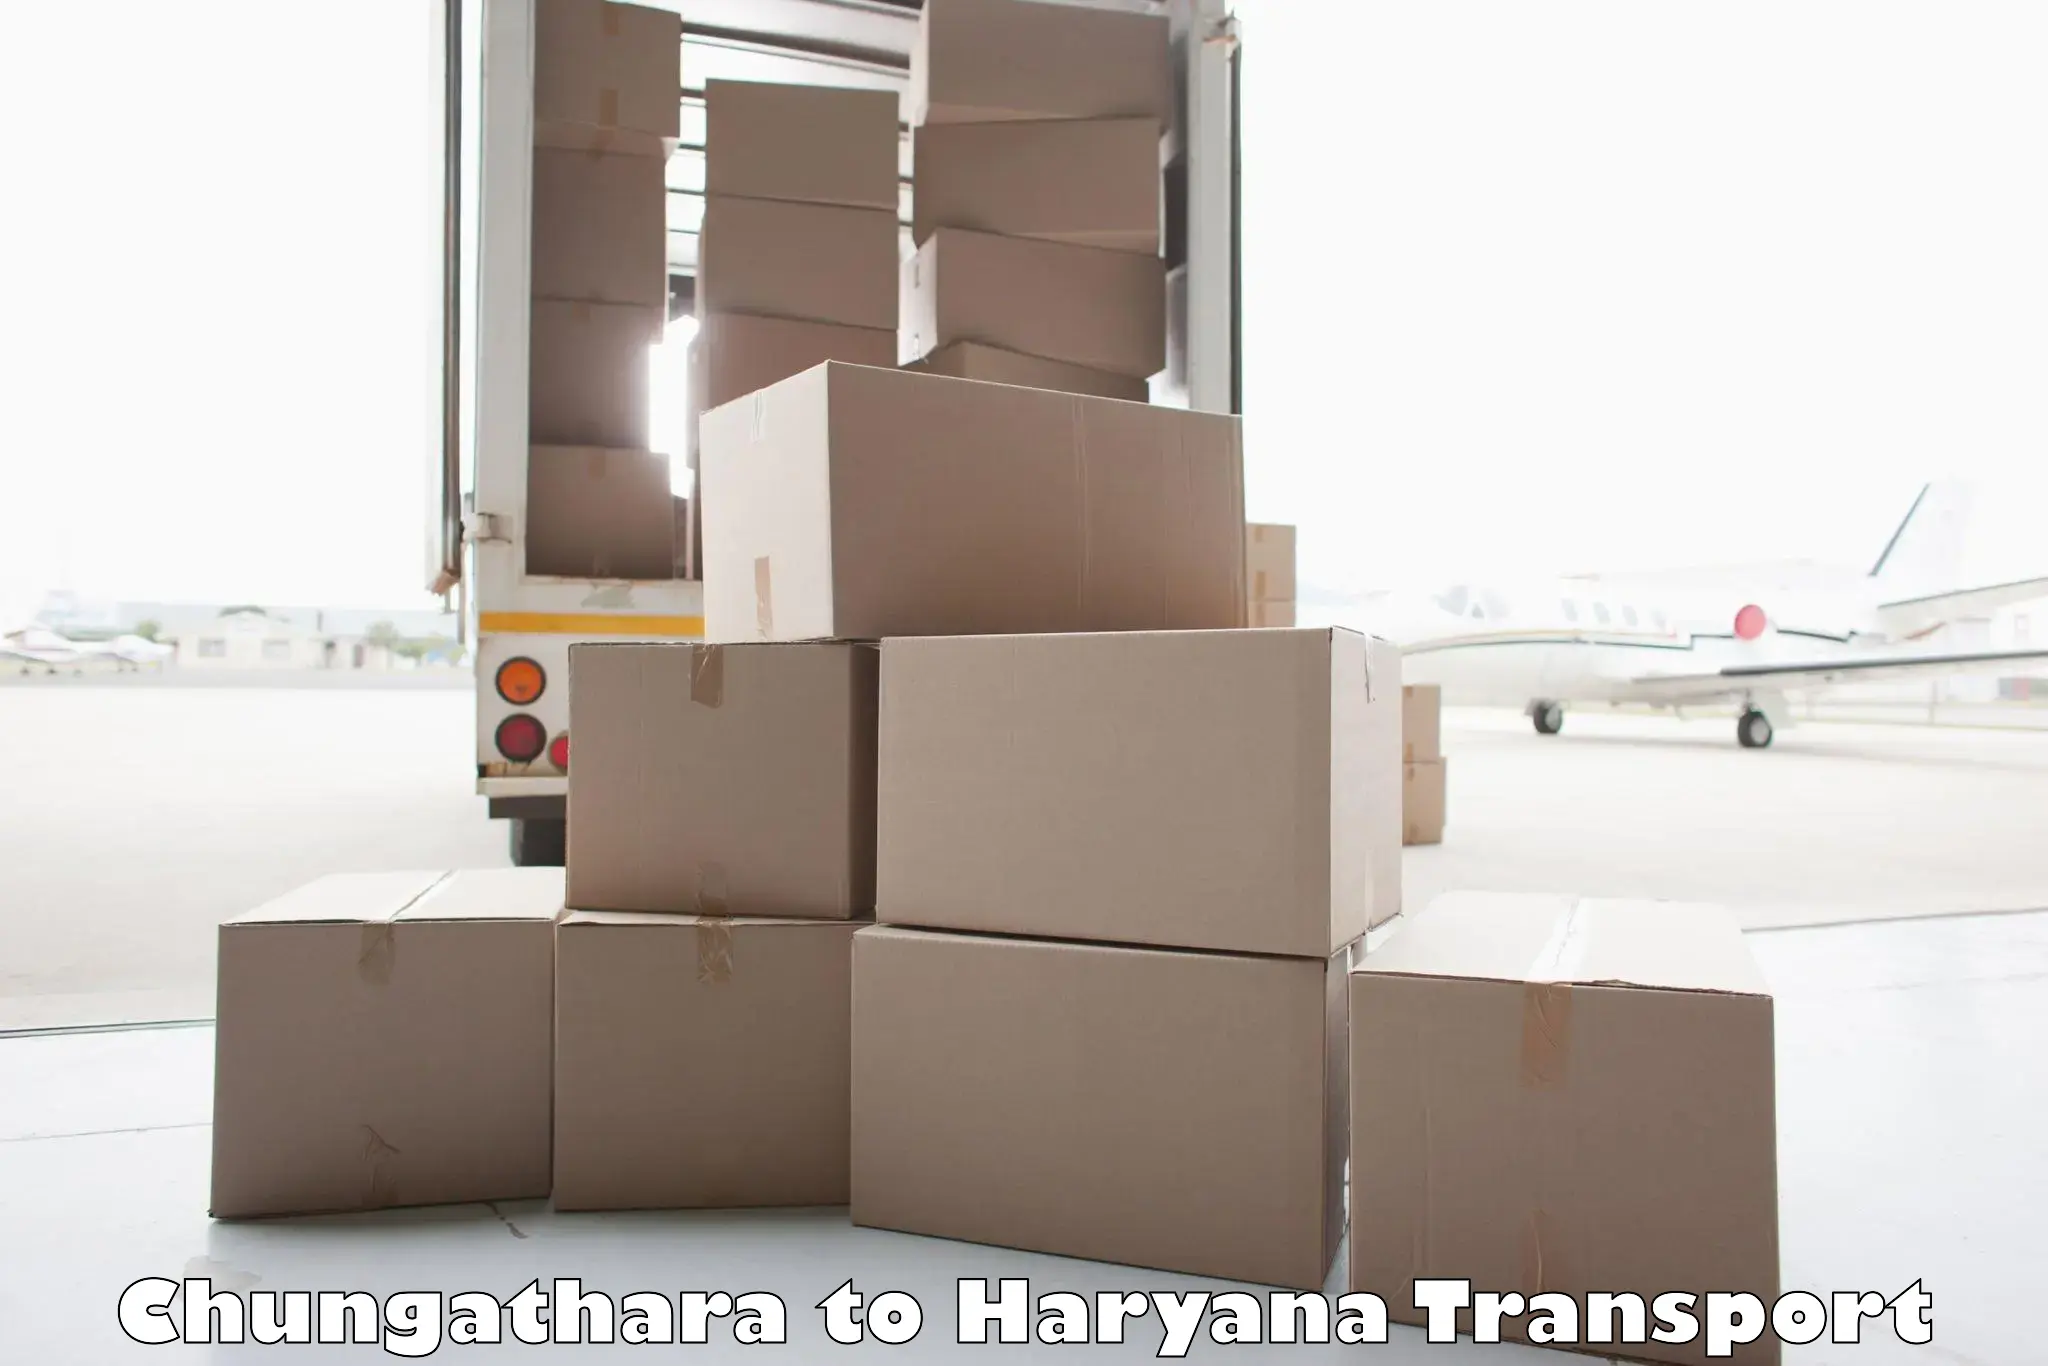 Commercial transport service Chungathara to Chirya